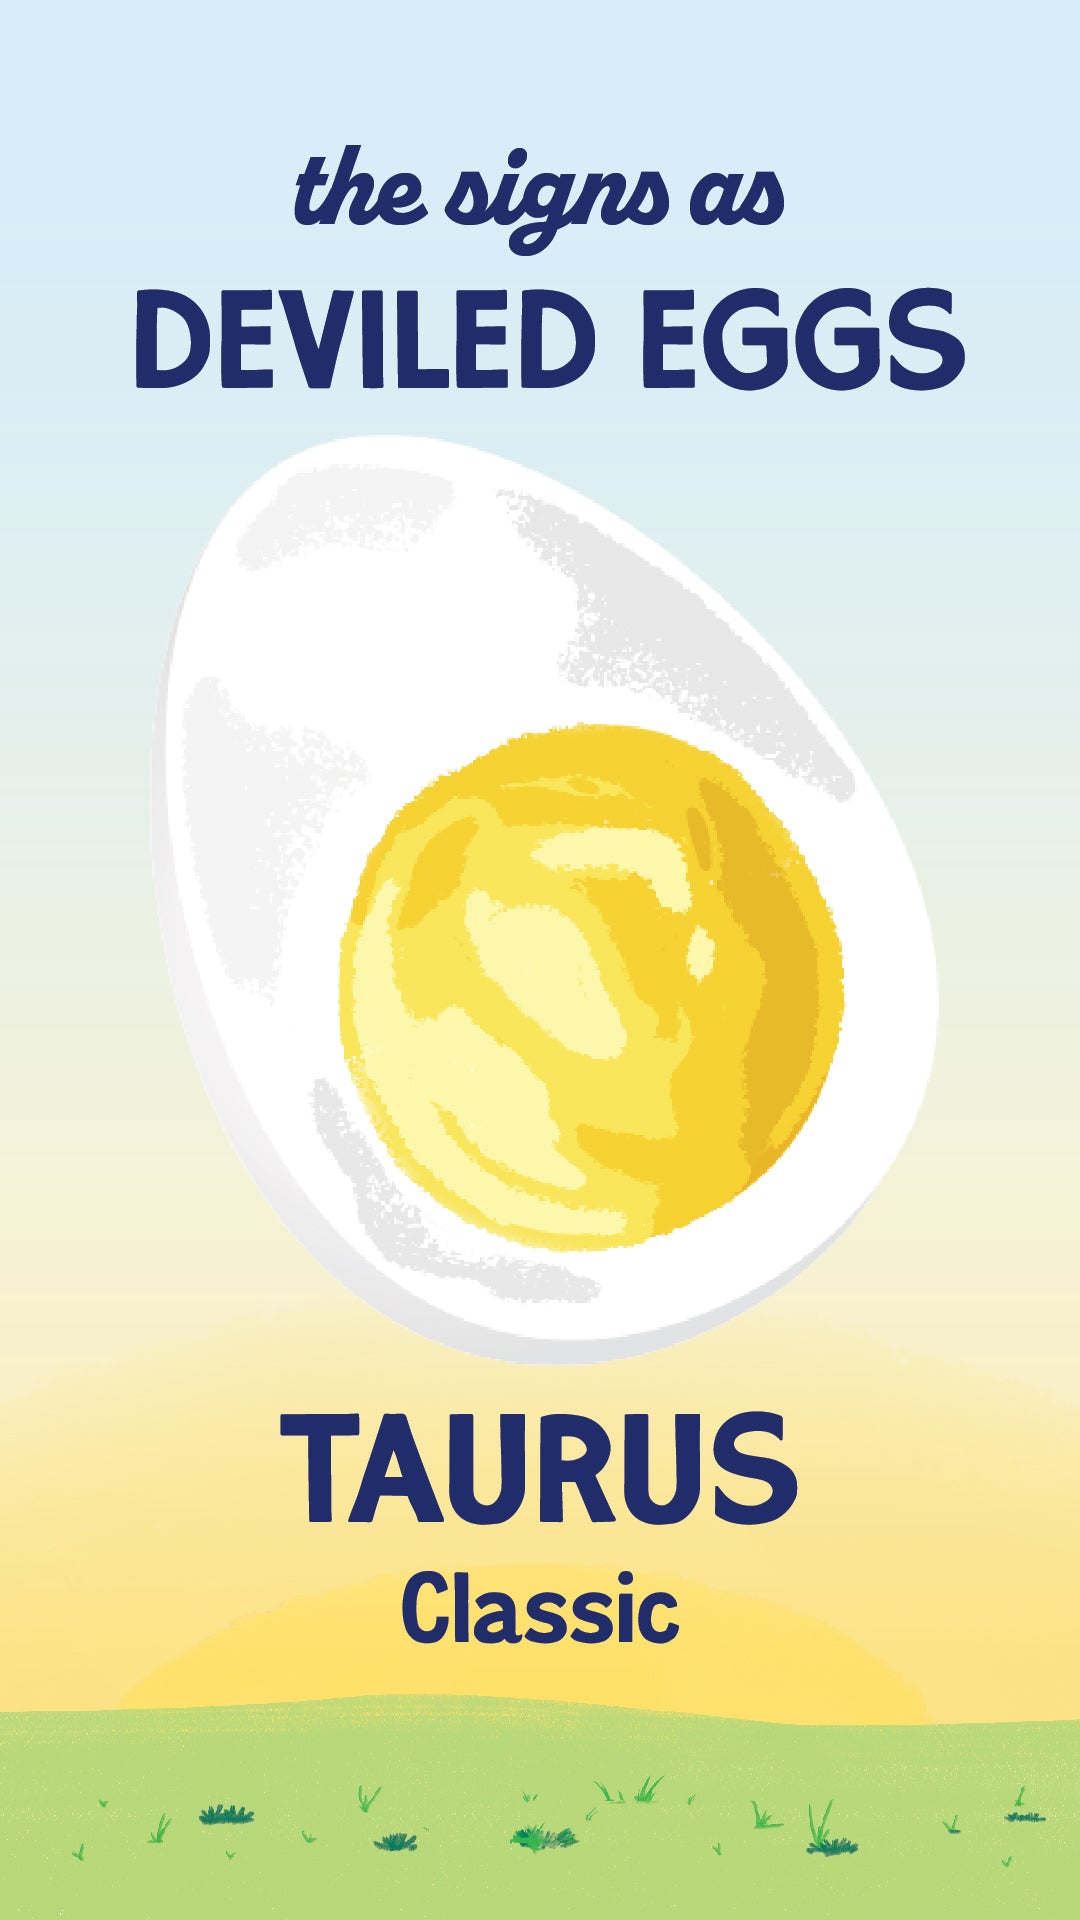 Illustration of zodiac sign Taurus as a classic deviled egg from recipe. | peteandgerrys.com